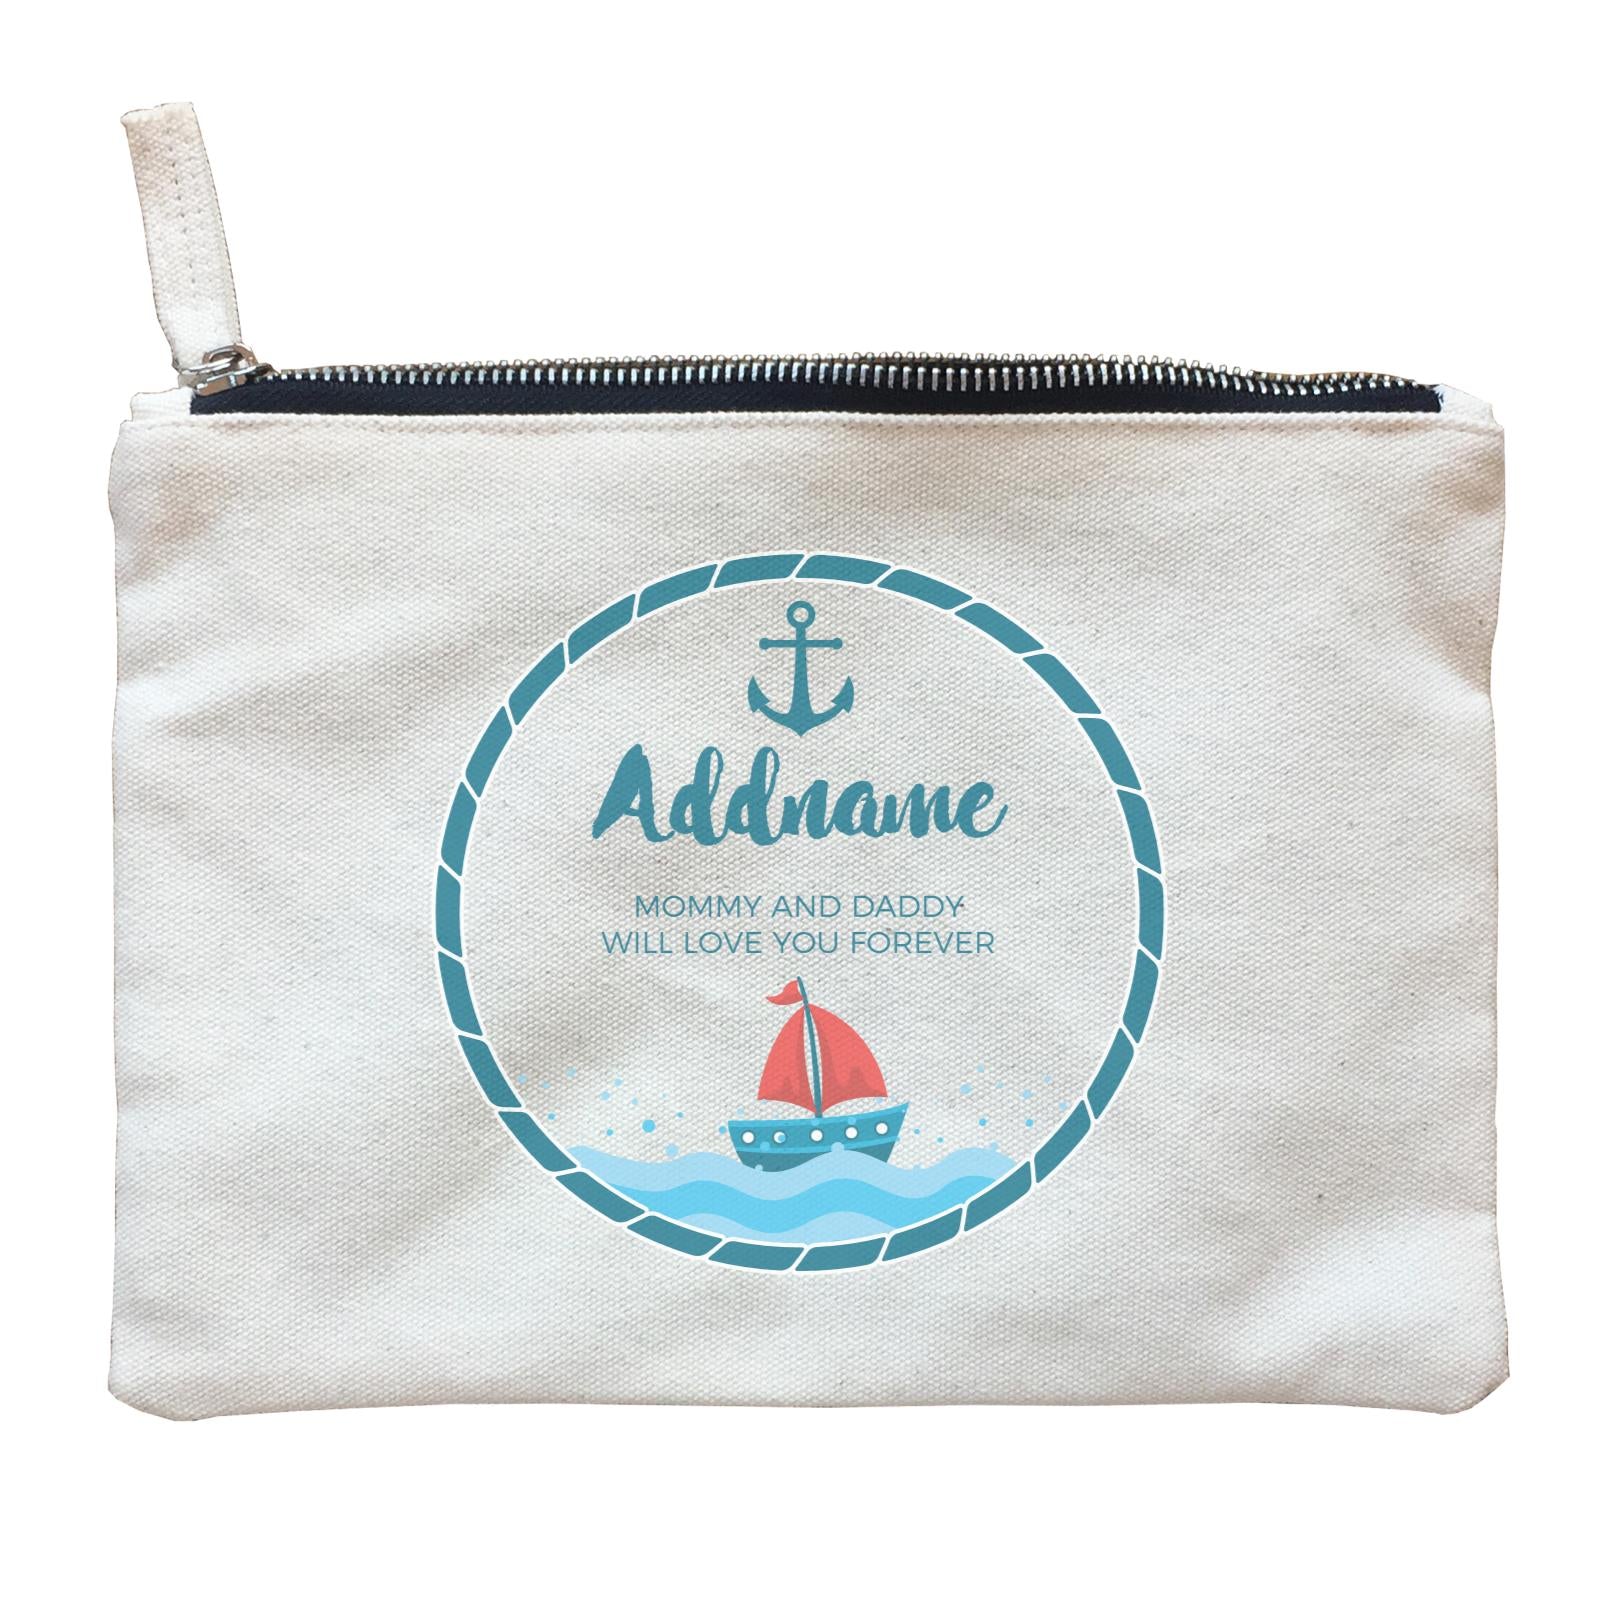 Sailor Emblem with Boat Personalizable with Name and Text Zipper Pouch